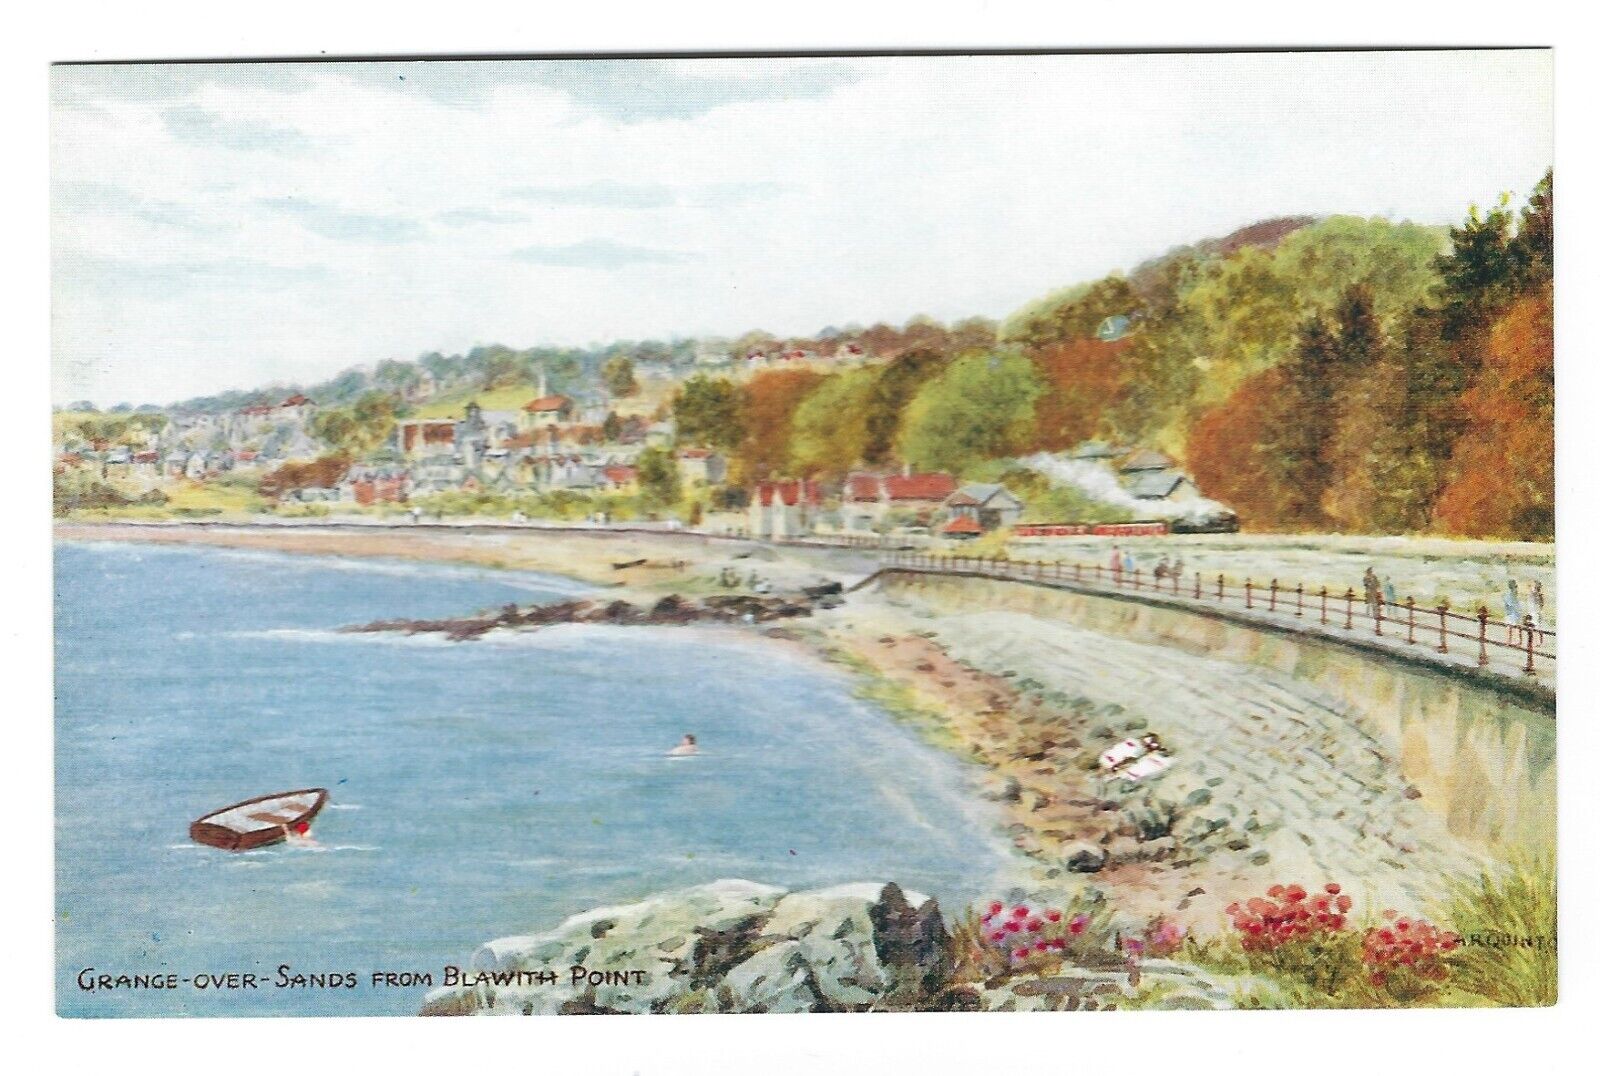 House Clearance - A R Quinton Cumbria card; Salmon 2764. Grange over Sands Blawith Point, pristine